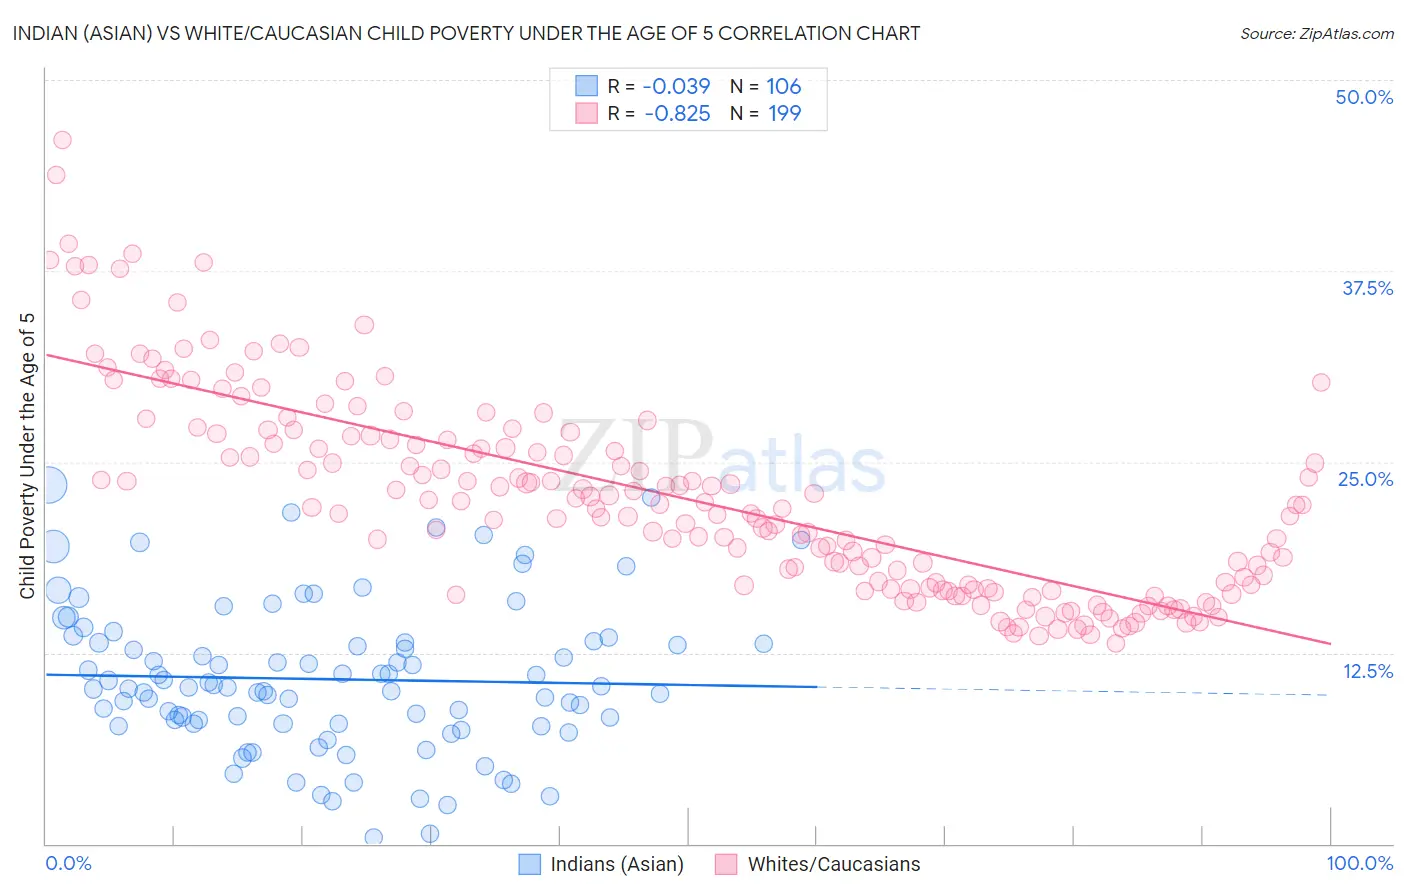 Indian (Asian) vs White/Caucasian Child Poverty Under the Age of 5